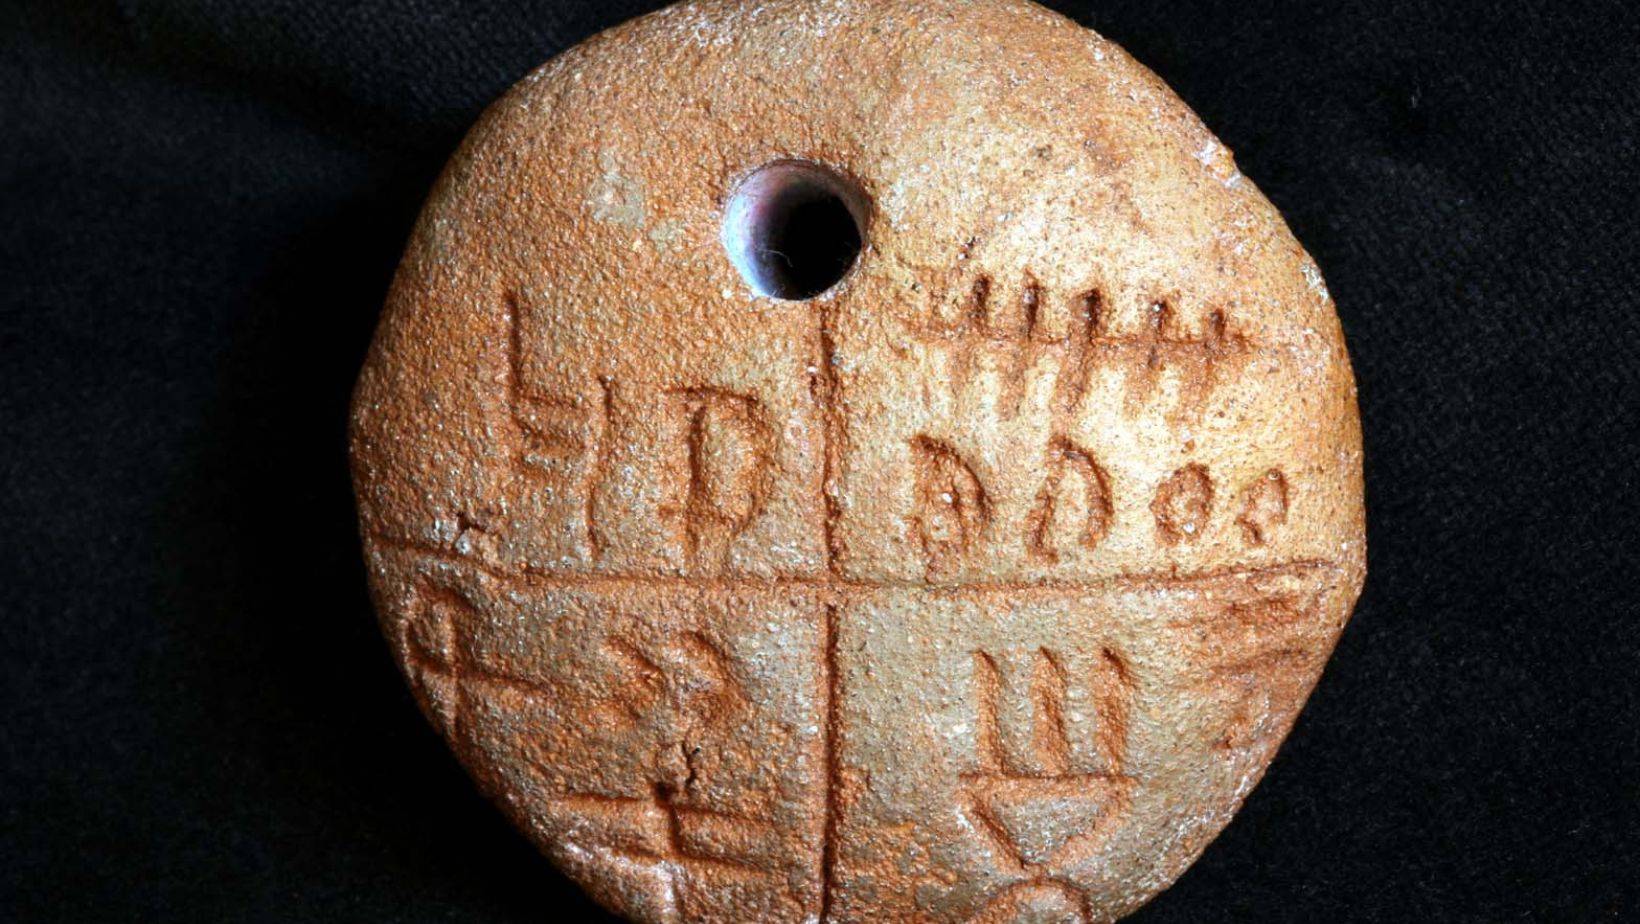 Deciphering the Tărtăria Tablets: Ancient Hungarian Writing or Mysterious Symbols?